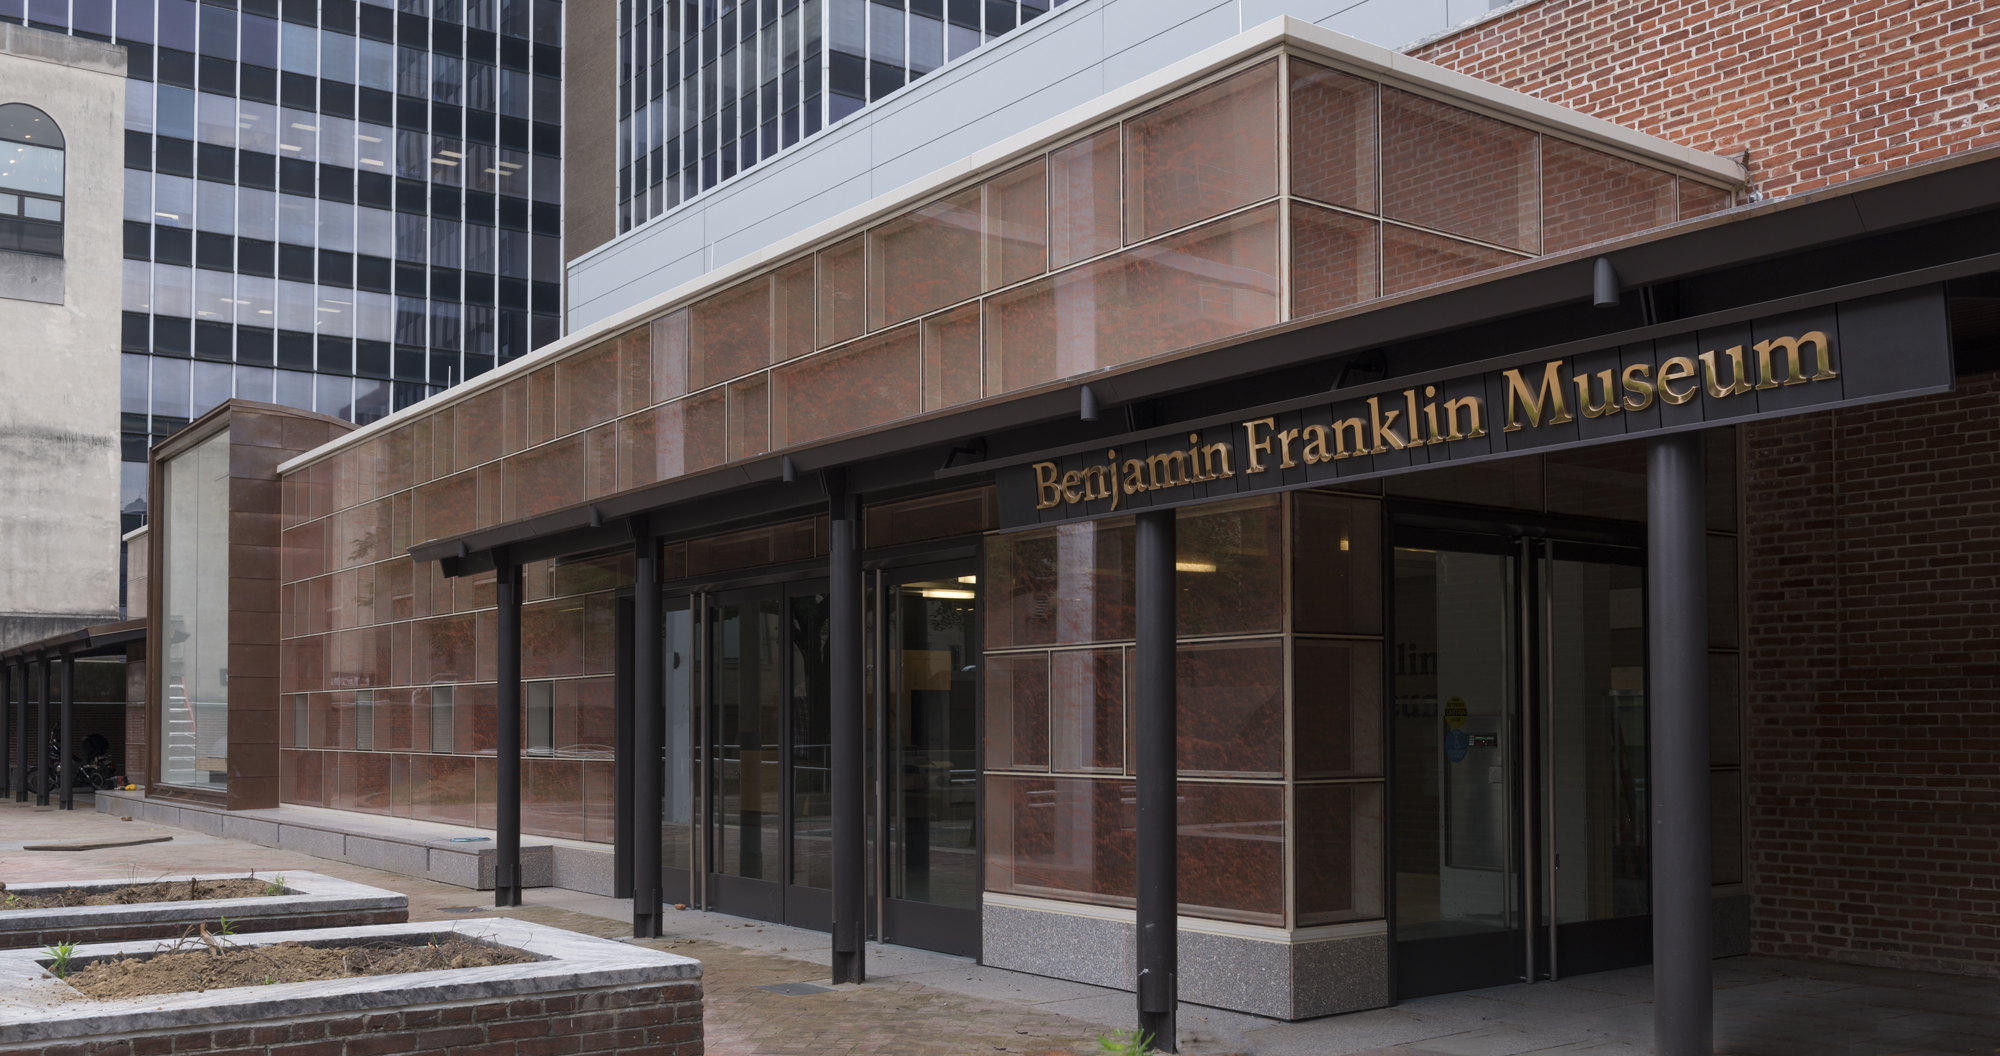 A color photo of the exterior of the Benjamin Franklin Museum in Franklin Court.